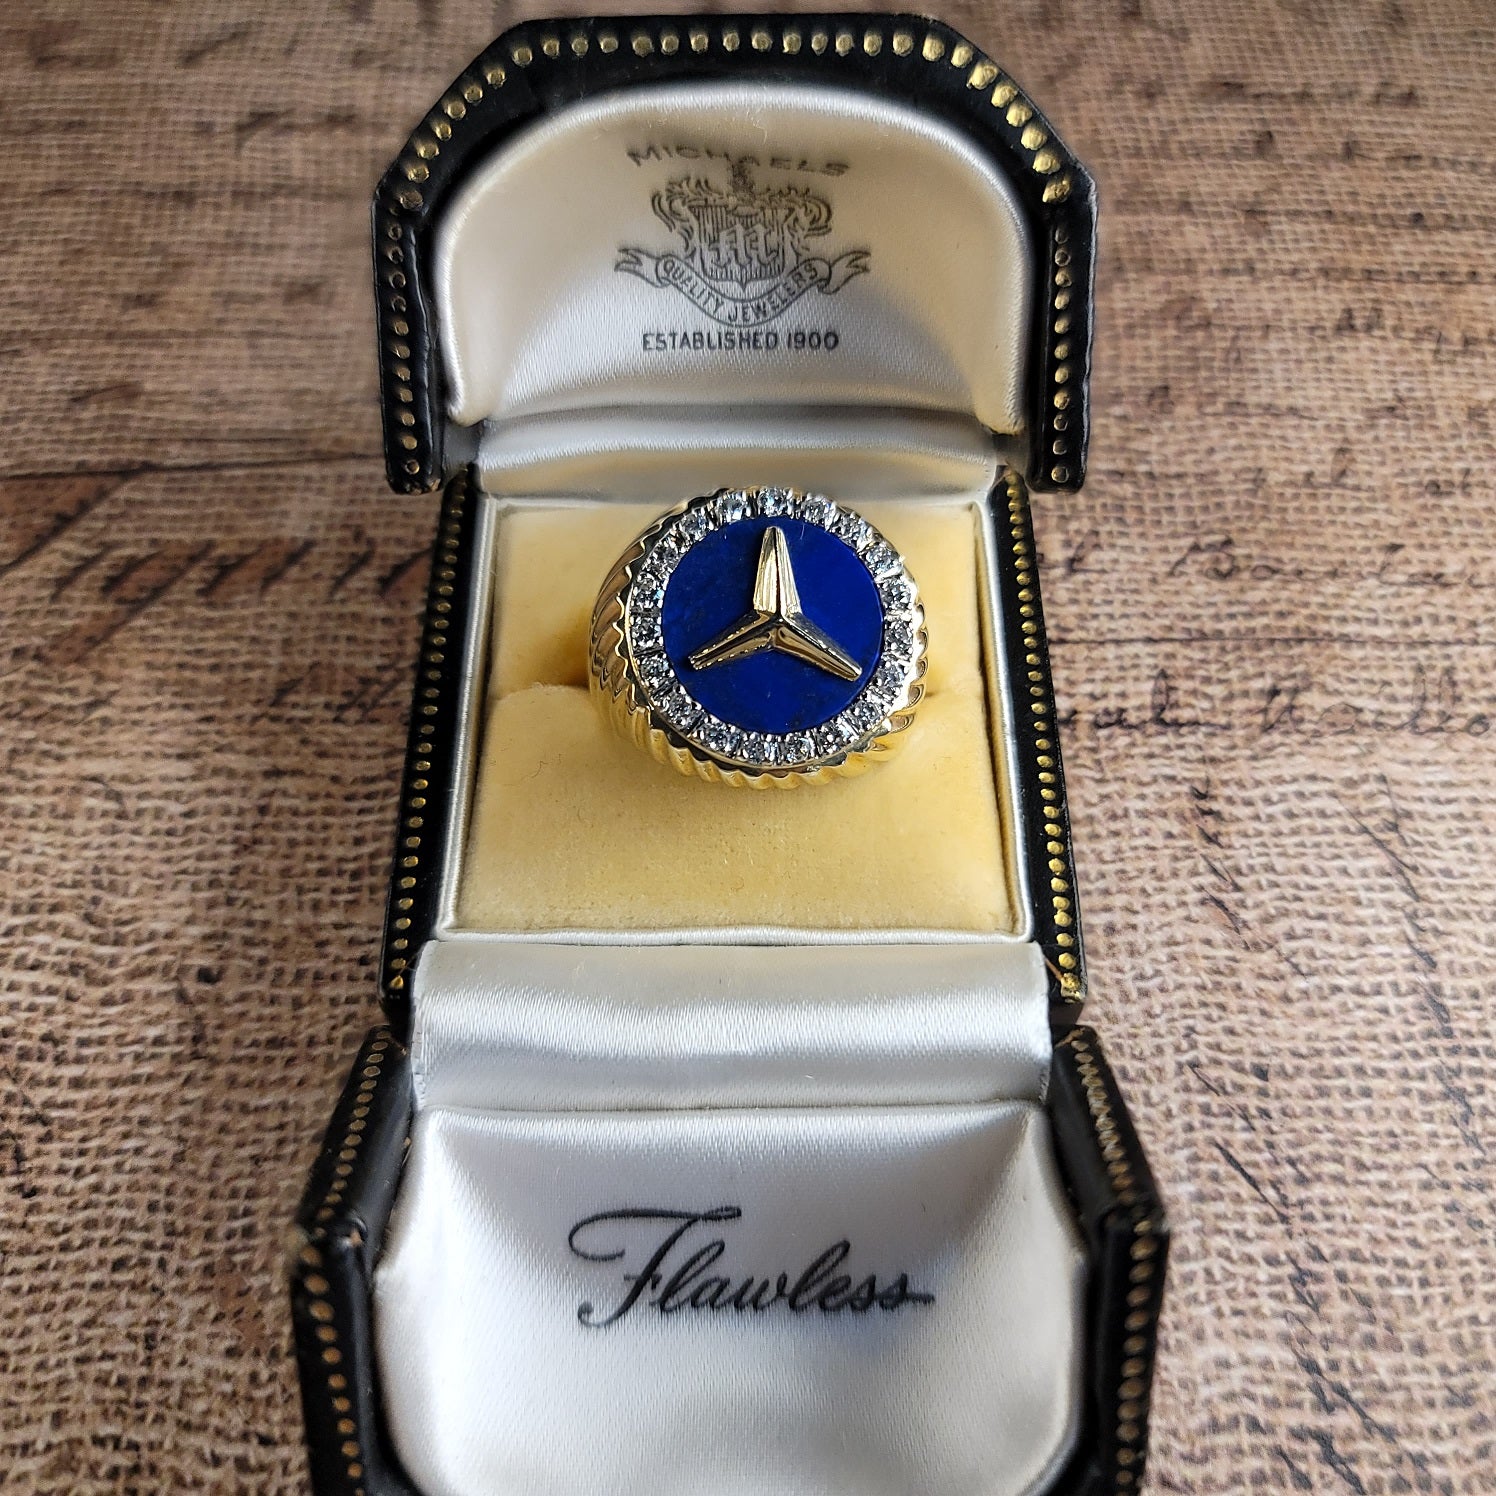 Shimmering Vintage Mercedes Benz Diamond and Lapis Lazuli Signet Mens Ring in 14K | Peter's Vaults